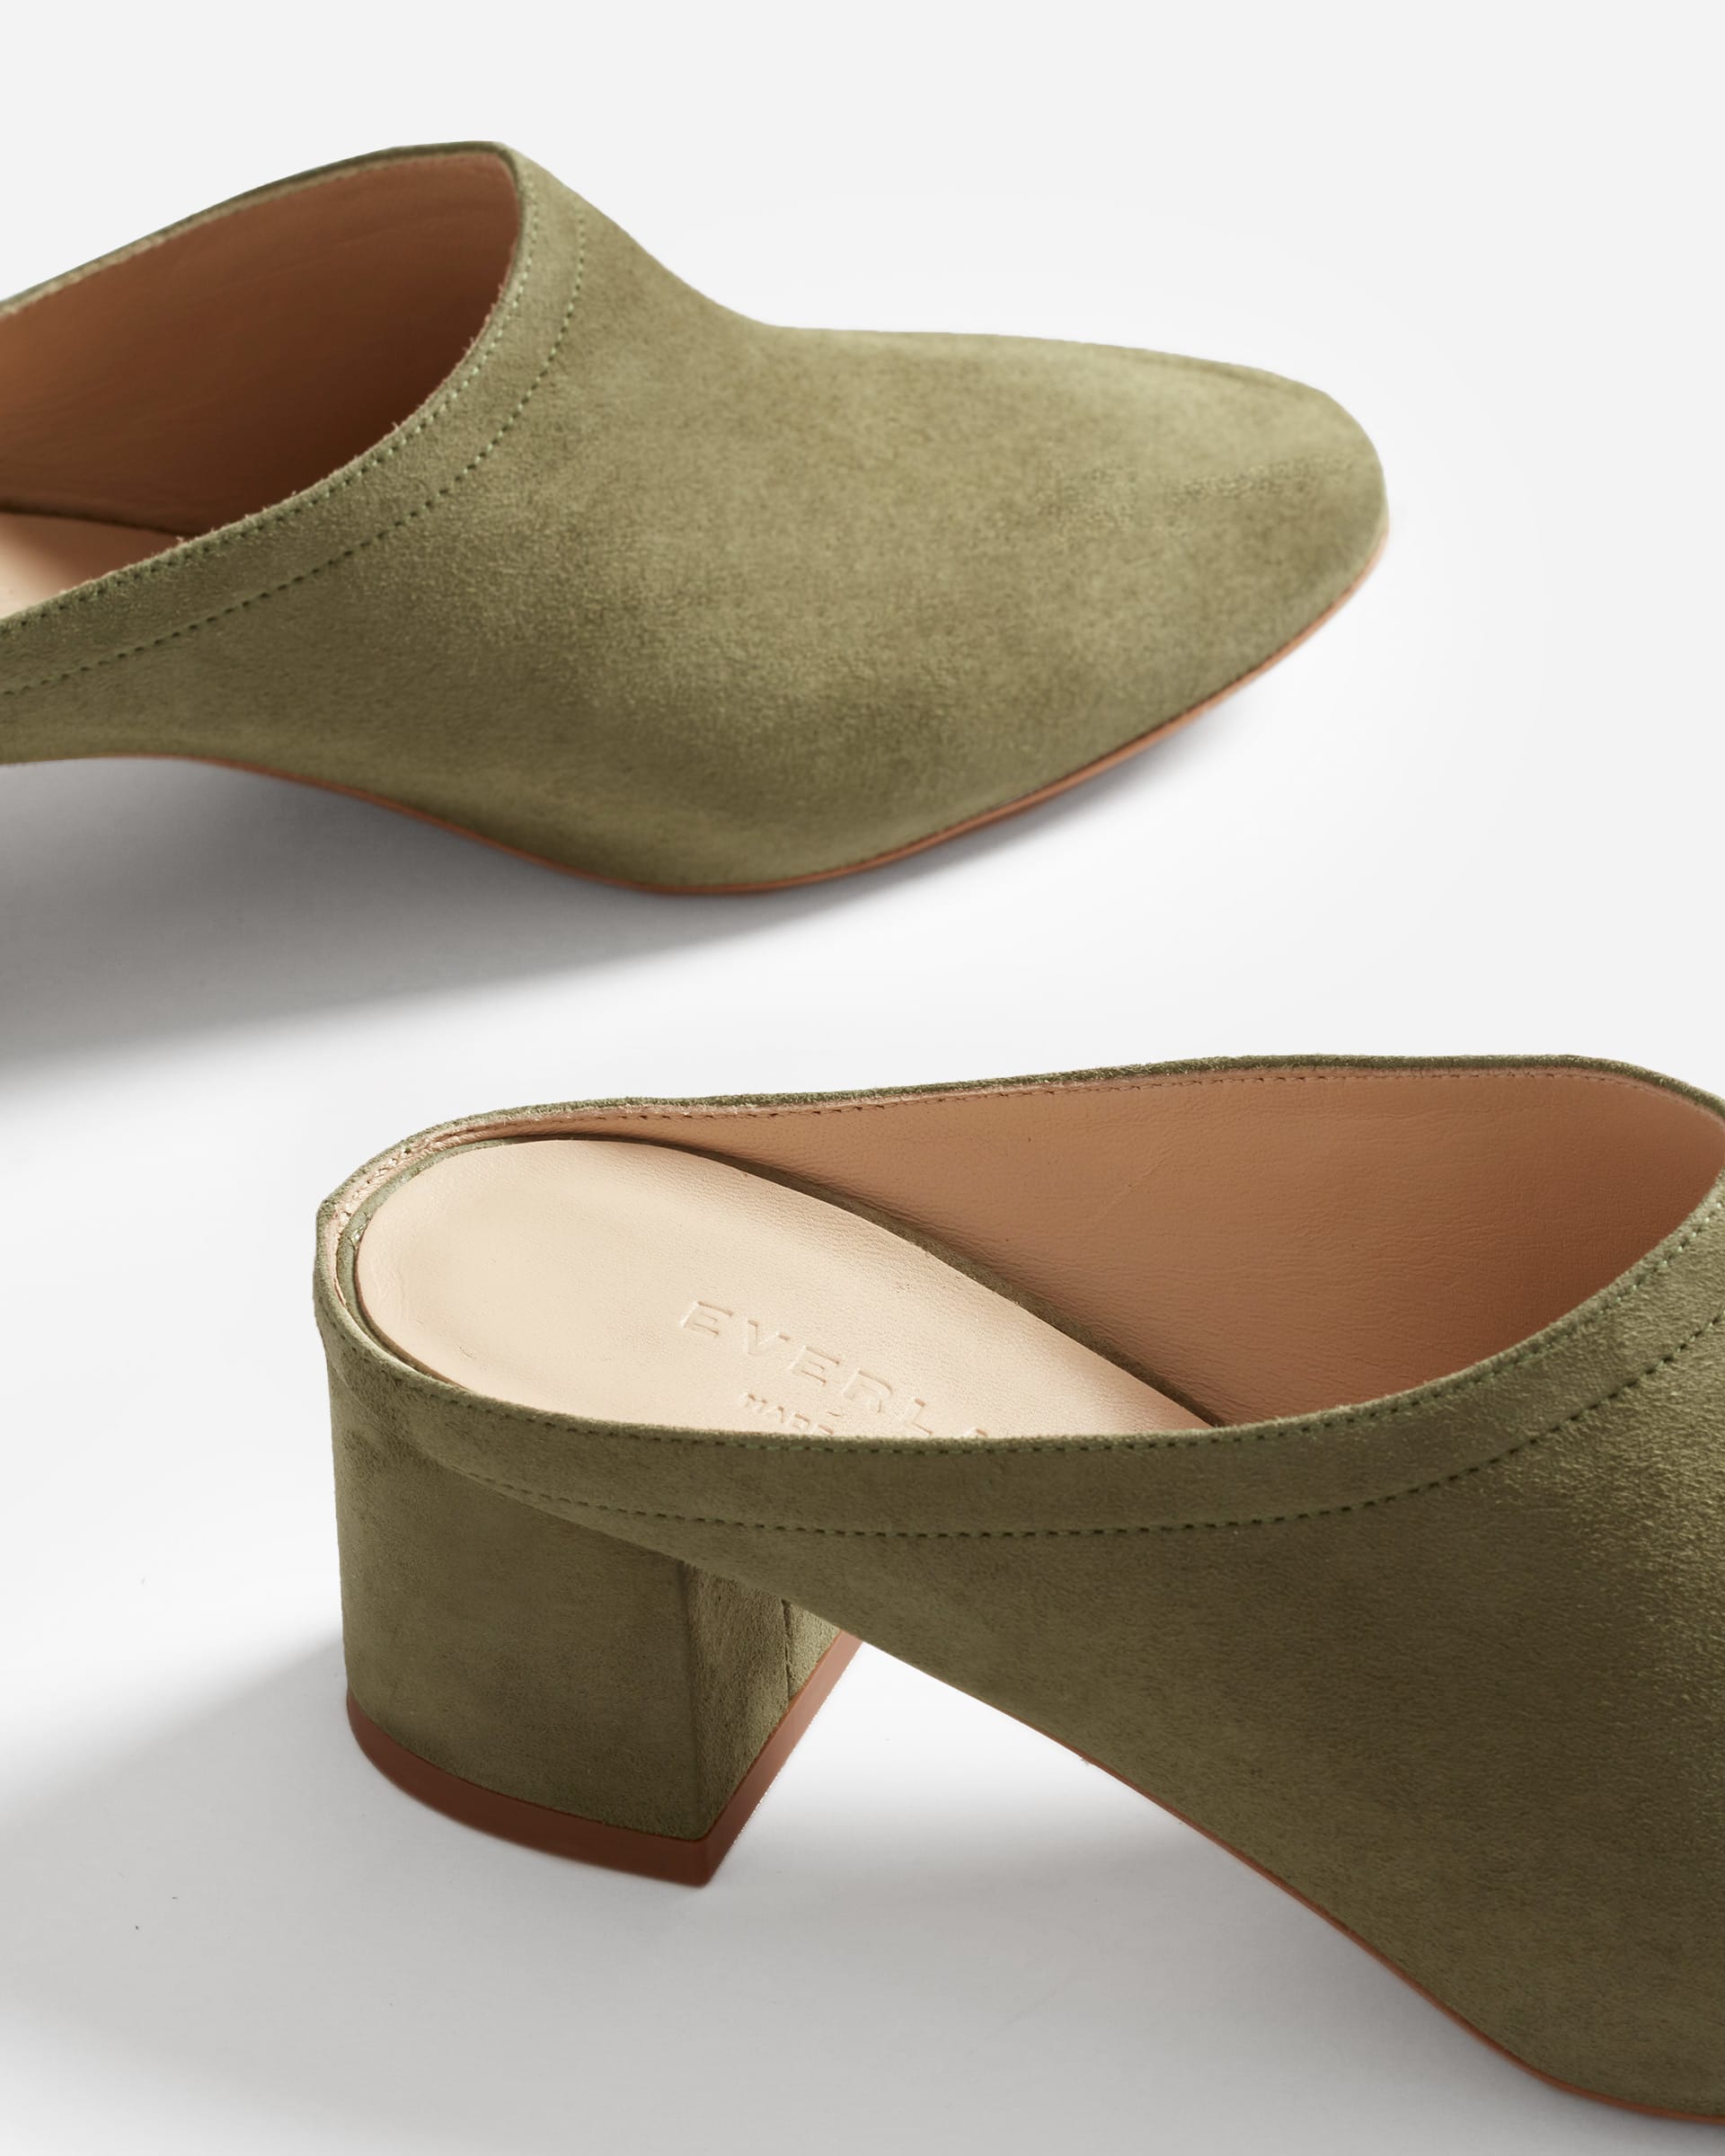 The Day Heel Mule Olive Suede – Everlane